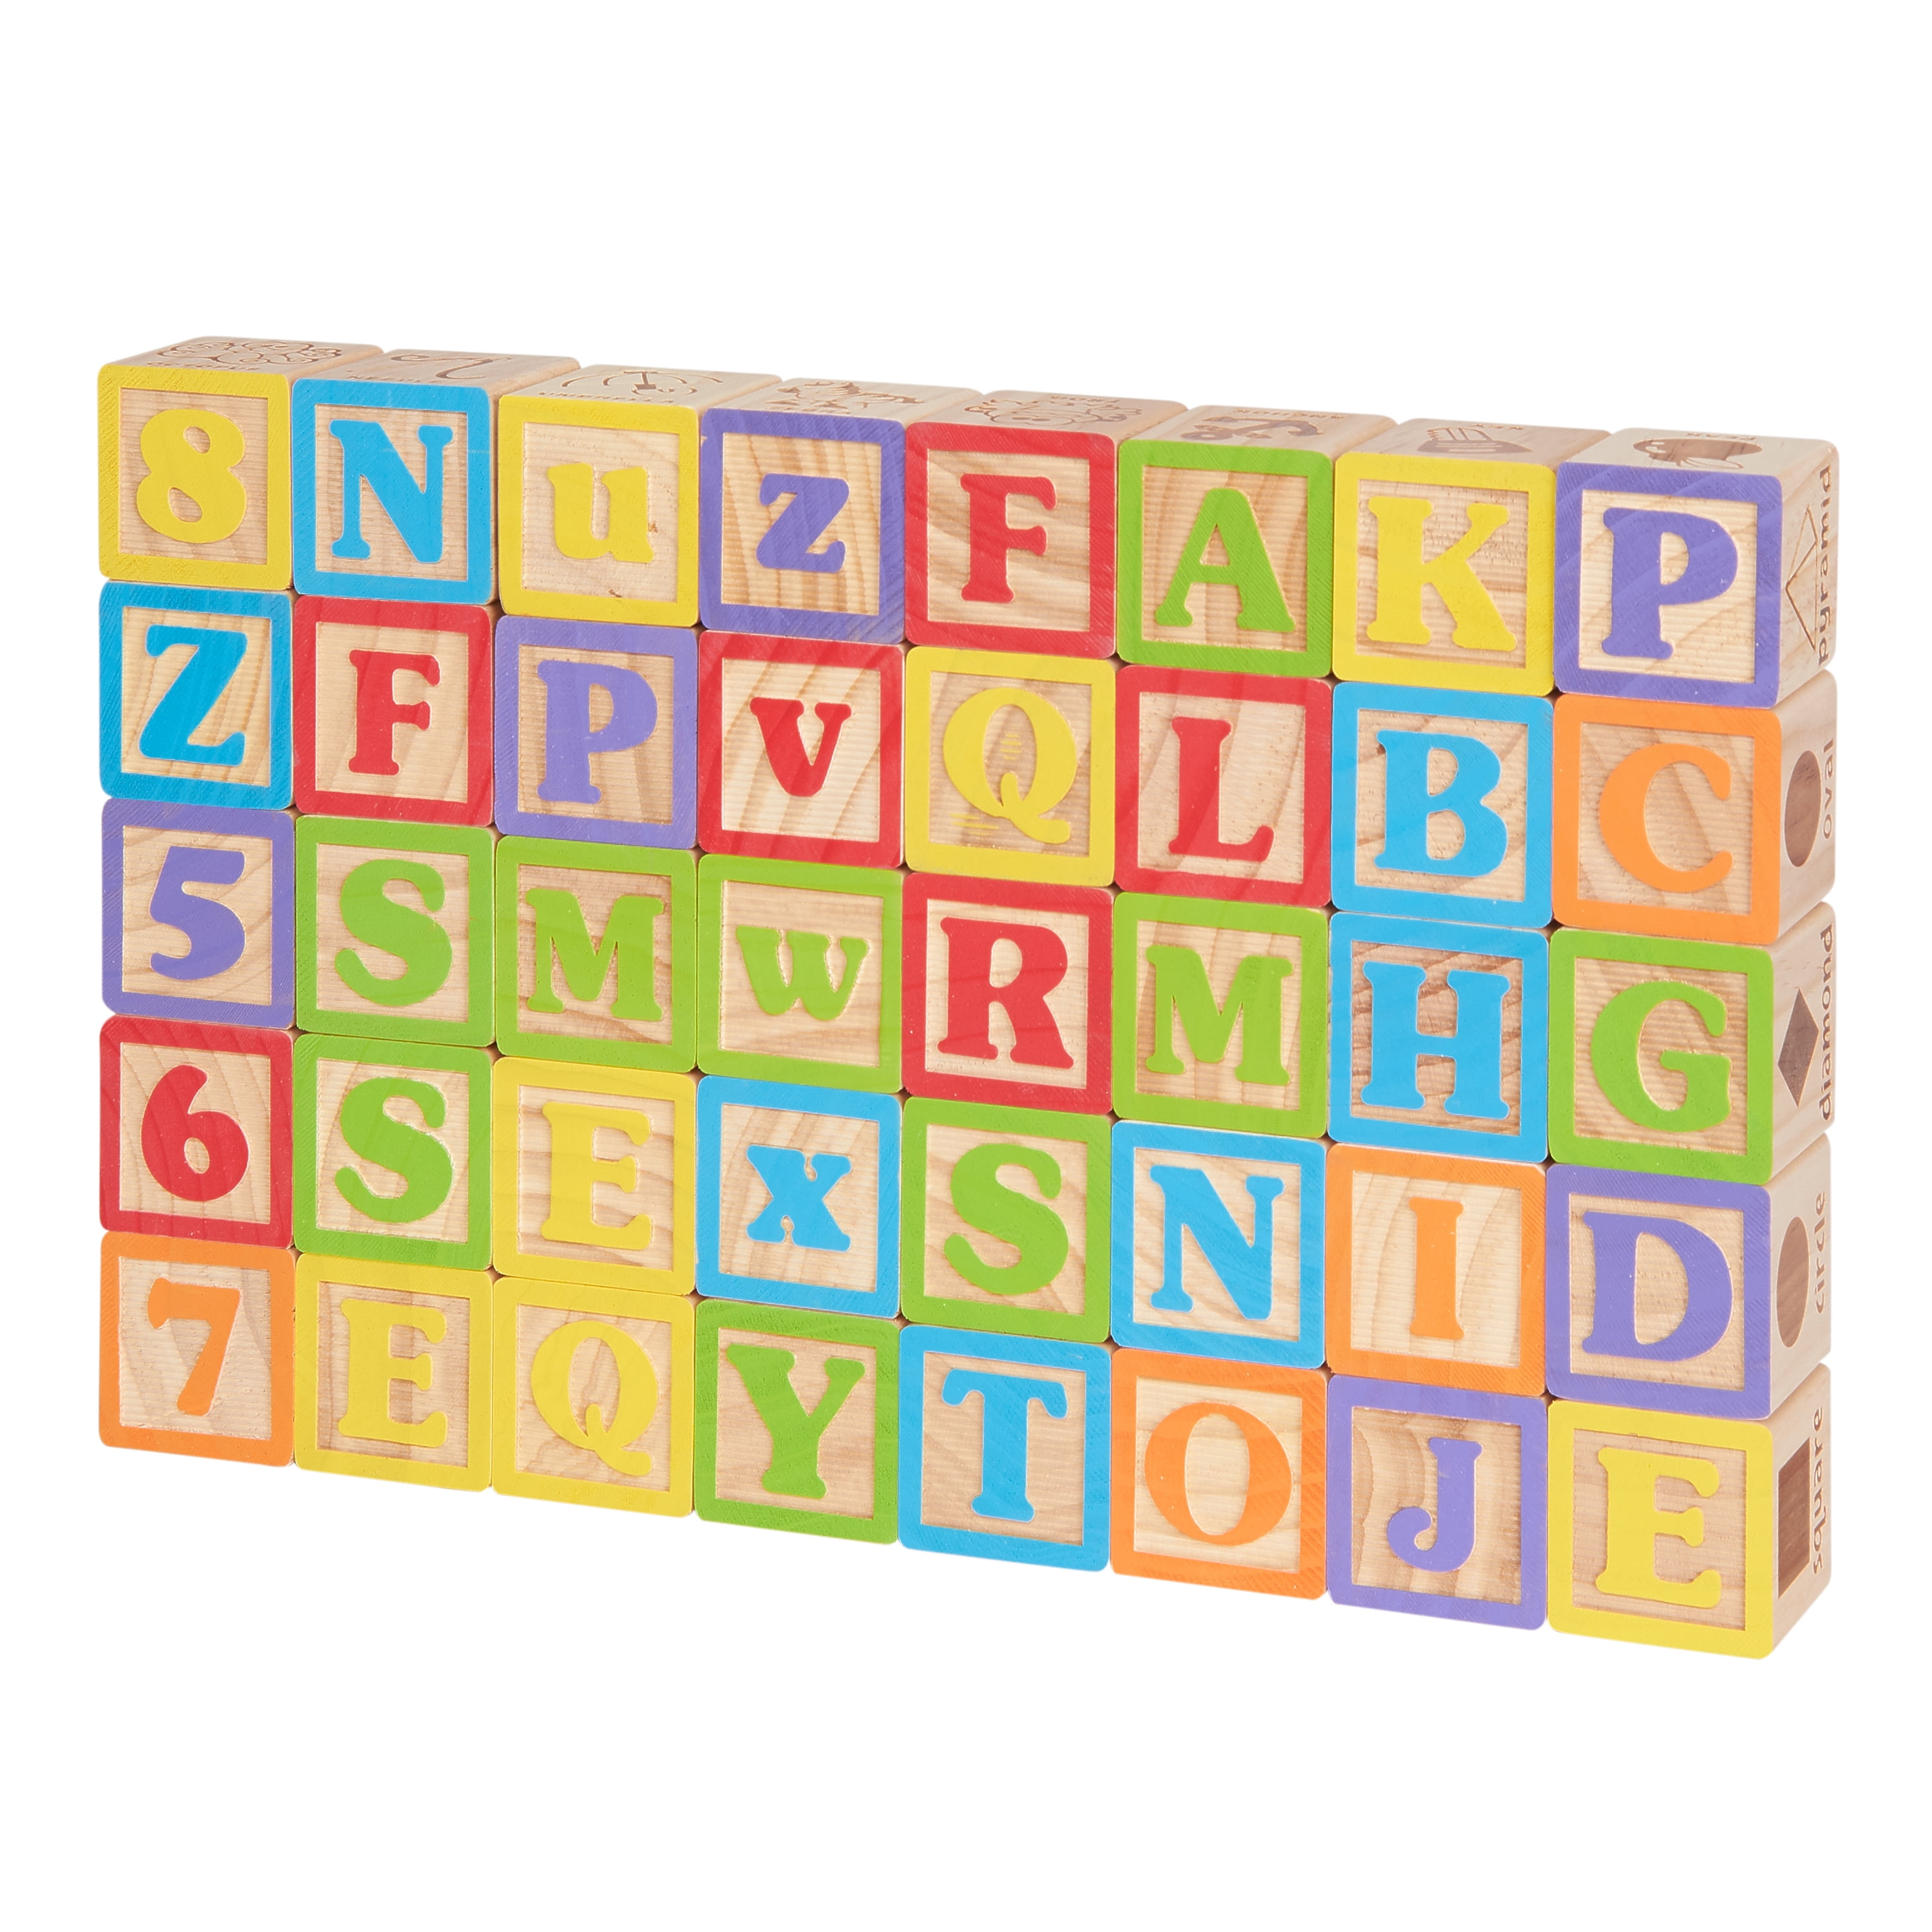 Cards Transser 30PC Wooden Educational Toys Learning Matching Letter Games and Develops Alphabet Words Spelling Skills Letter Block Toys Gift for Girls Boys shipping from CA. US Stock 